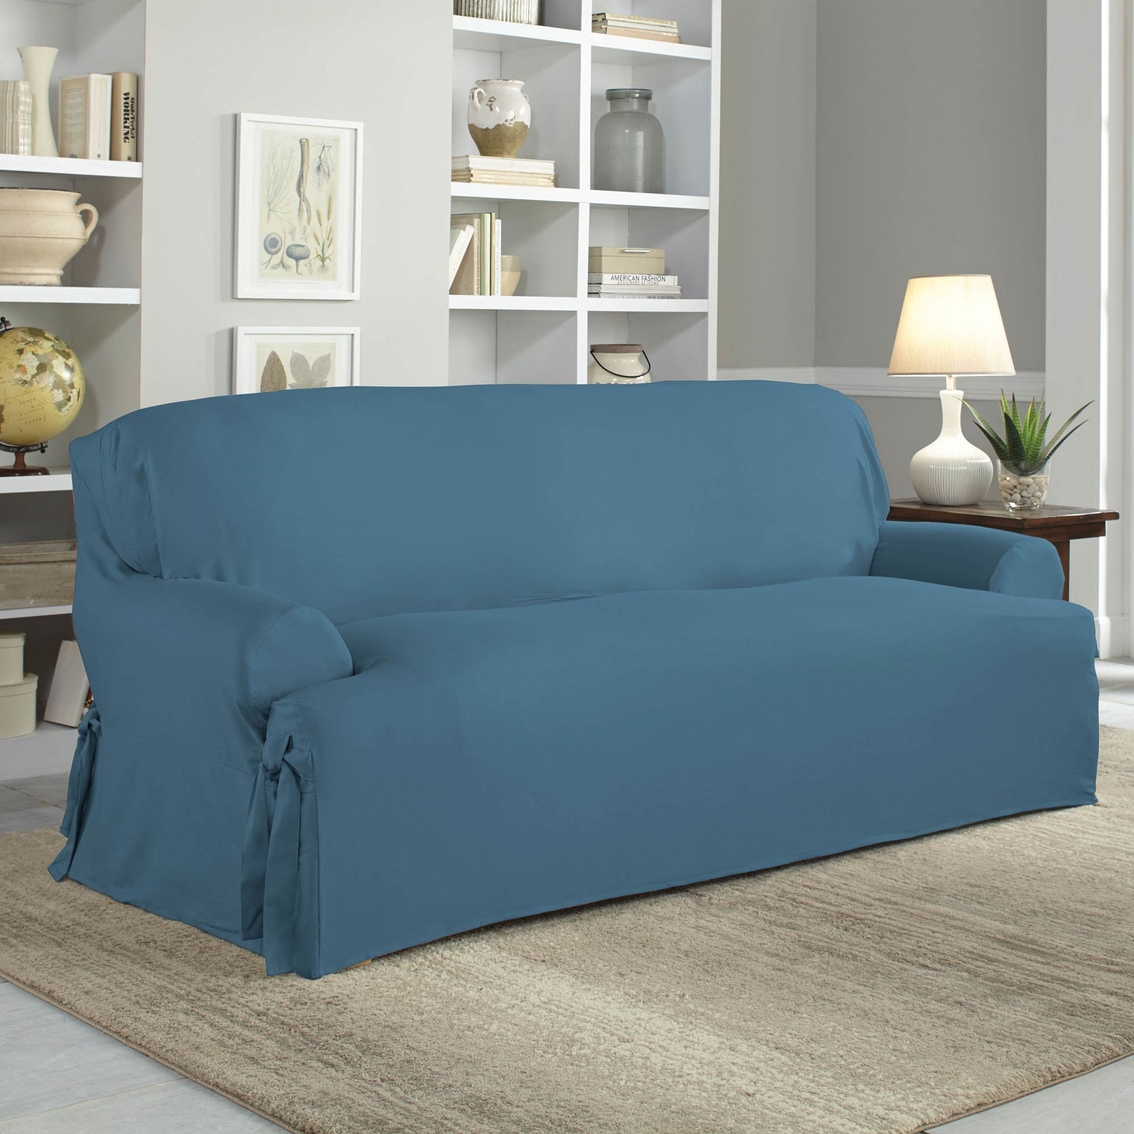 Serta Relaxed Fit Cotton Duck T Cushion Sofa Slipcover